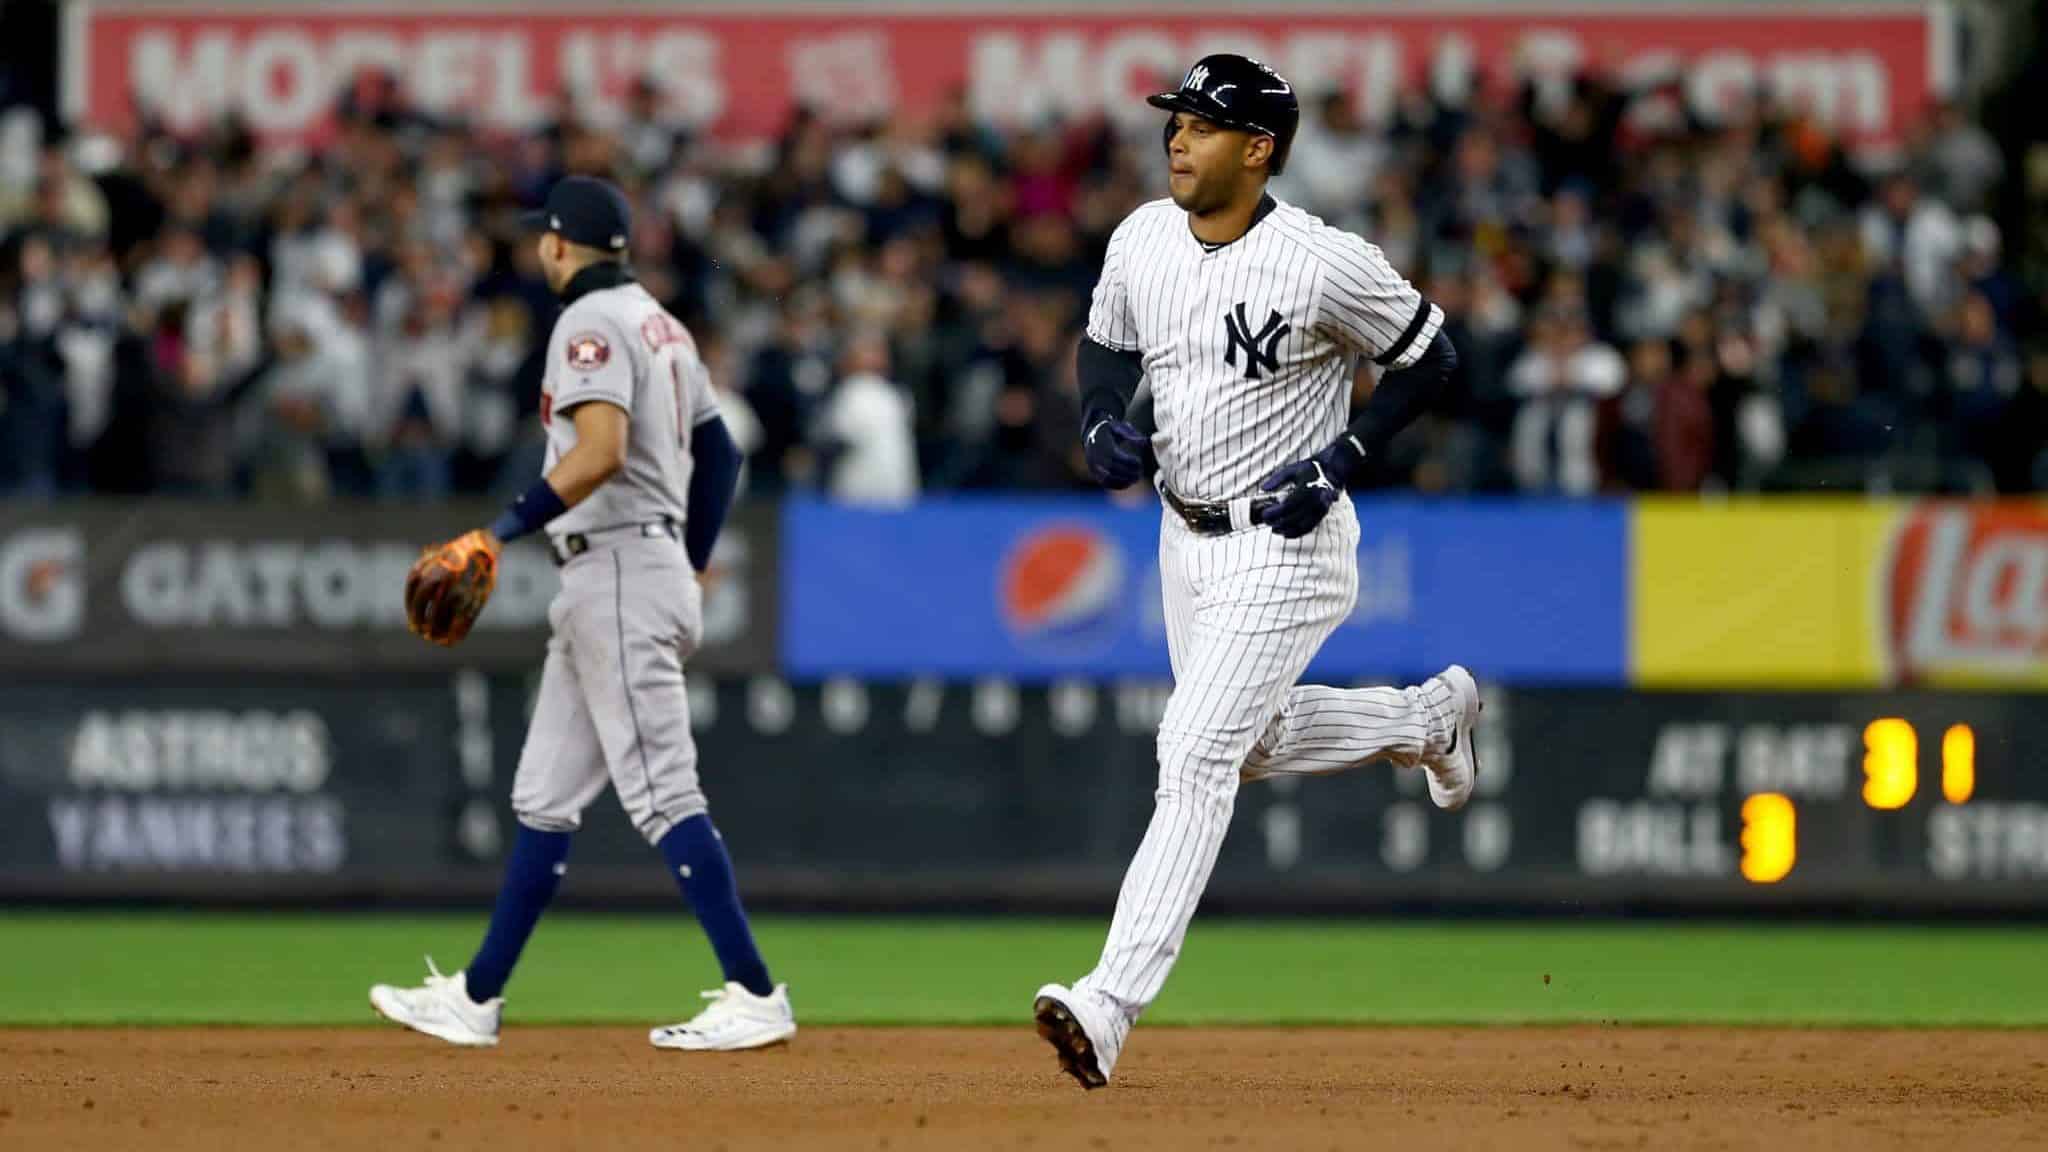 NEW YORK, NEW YORK - OCTOBER 18: Aaron Hicks #31 of the New York Yankees rounds the bases after hitting a three run home run against Justin Verlander #35 of the Houston Astros during the first inning in game five of the American League Championship Series at Yankee Stadium on October 18, 2019 in New York City.